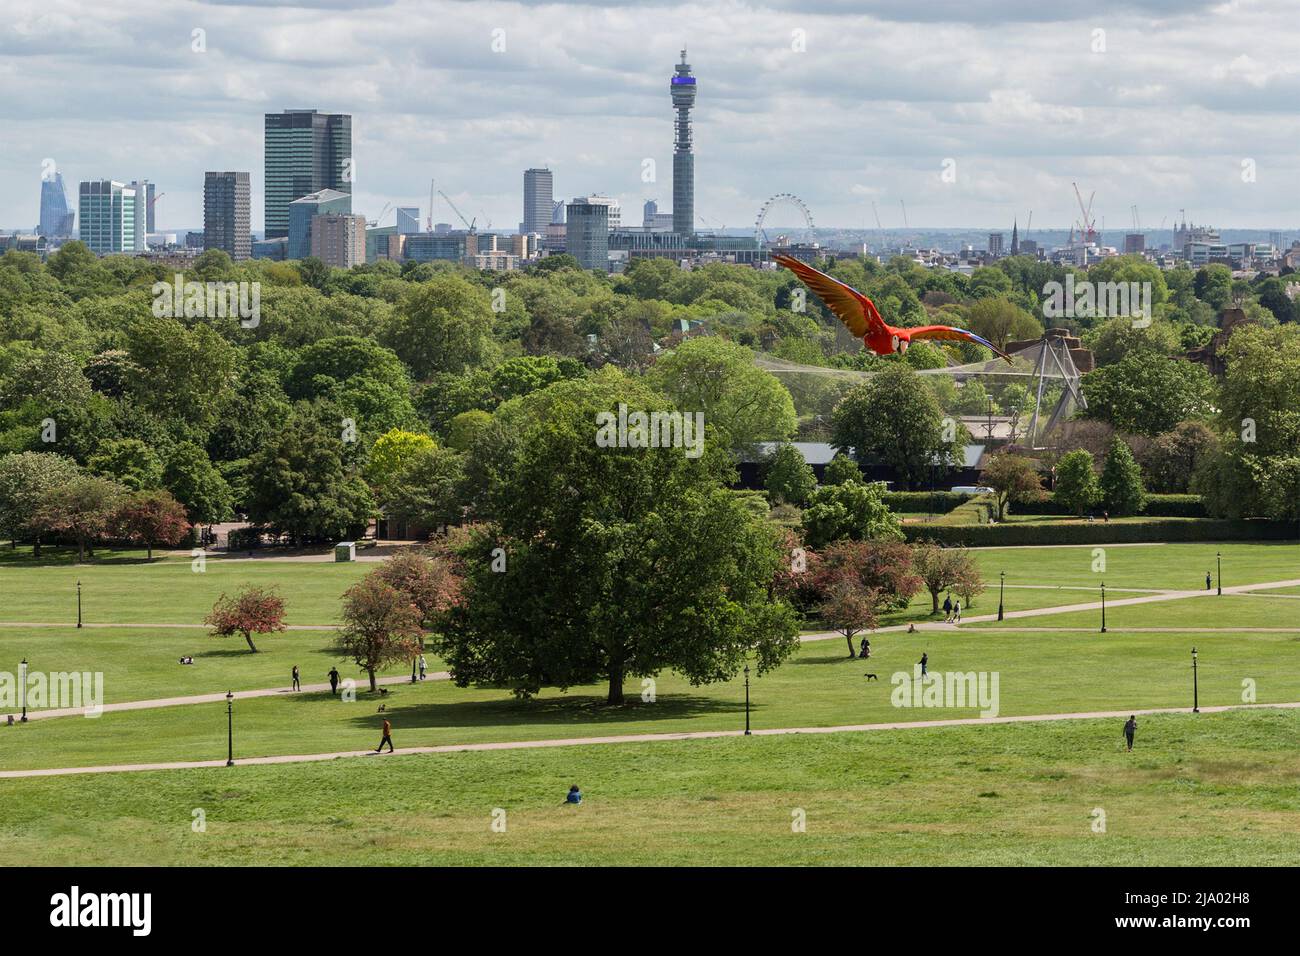 A Scarlet Macaw flies freely on Primrose Hill. In the background the Central London skyline can be seen. Stock Photo